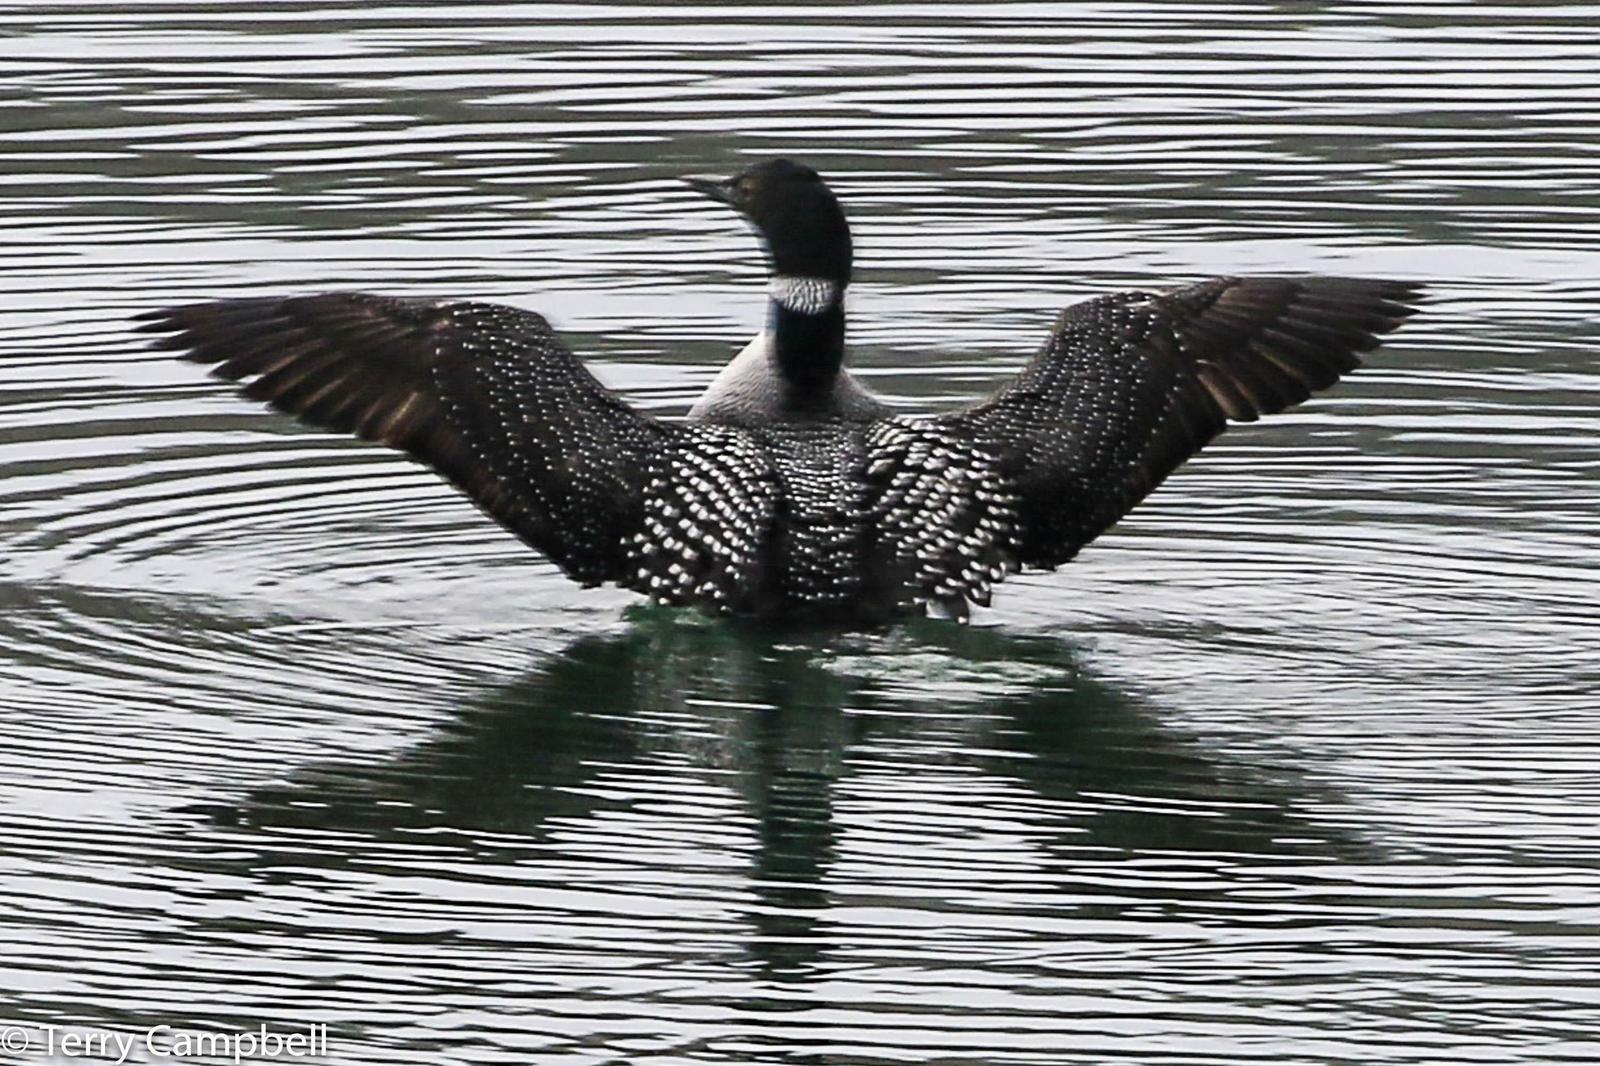 Common Loon Photo by Terry Campbell